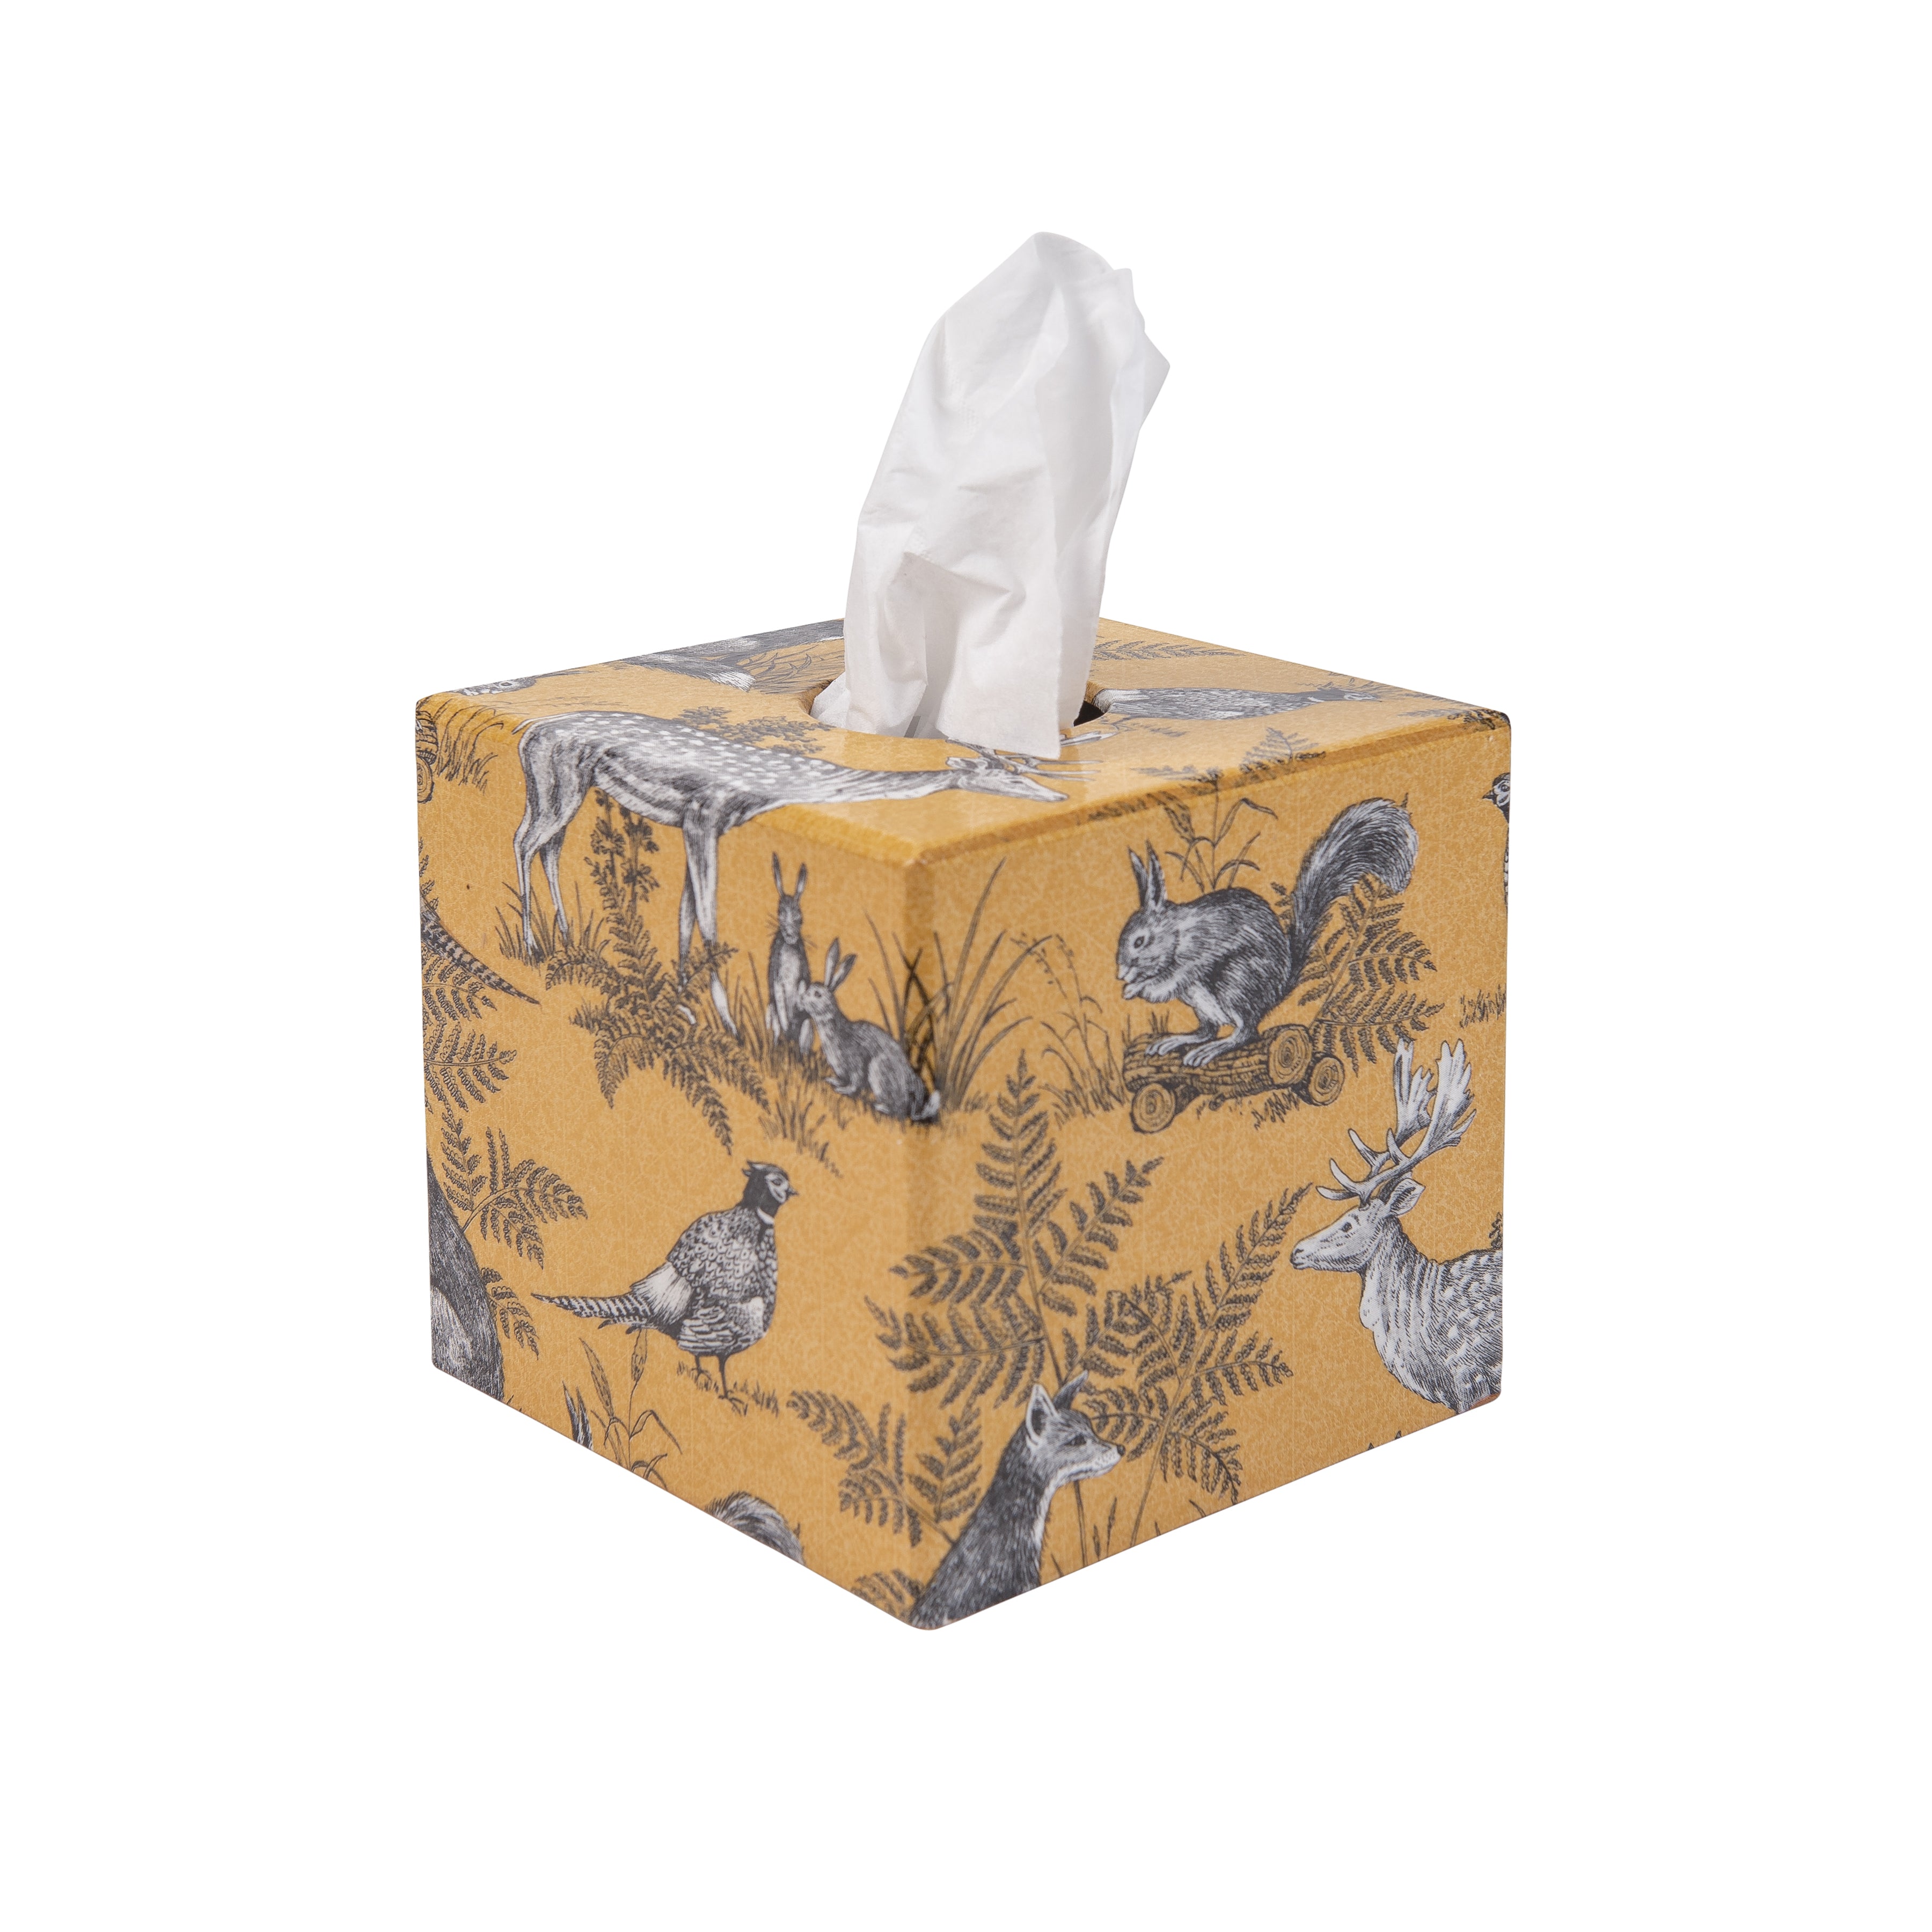 Gold Animals wooden Tissue Box Cover